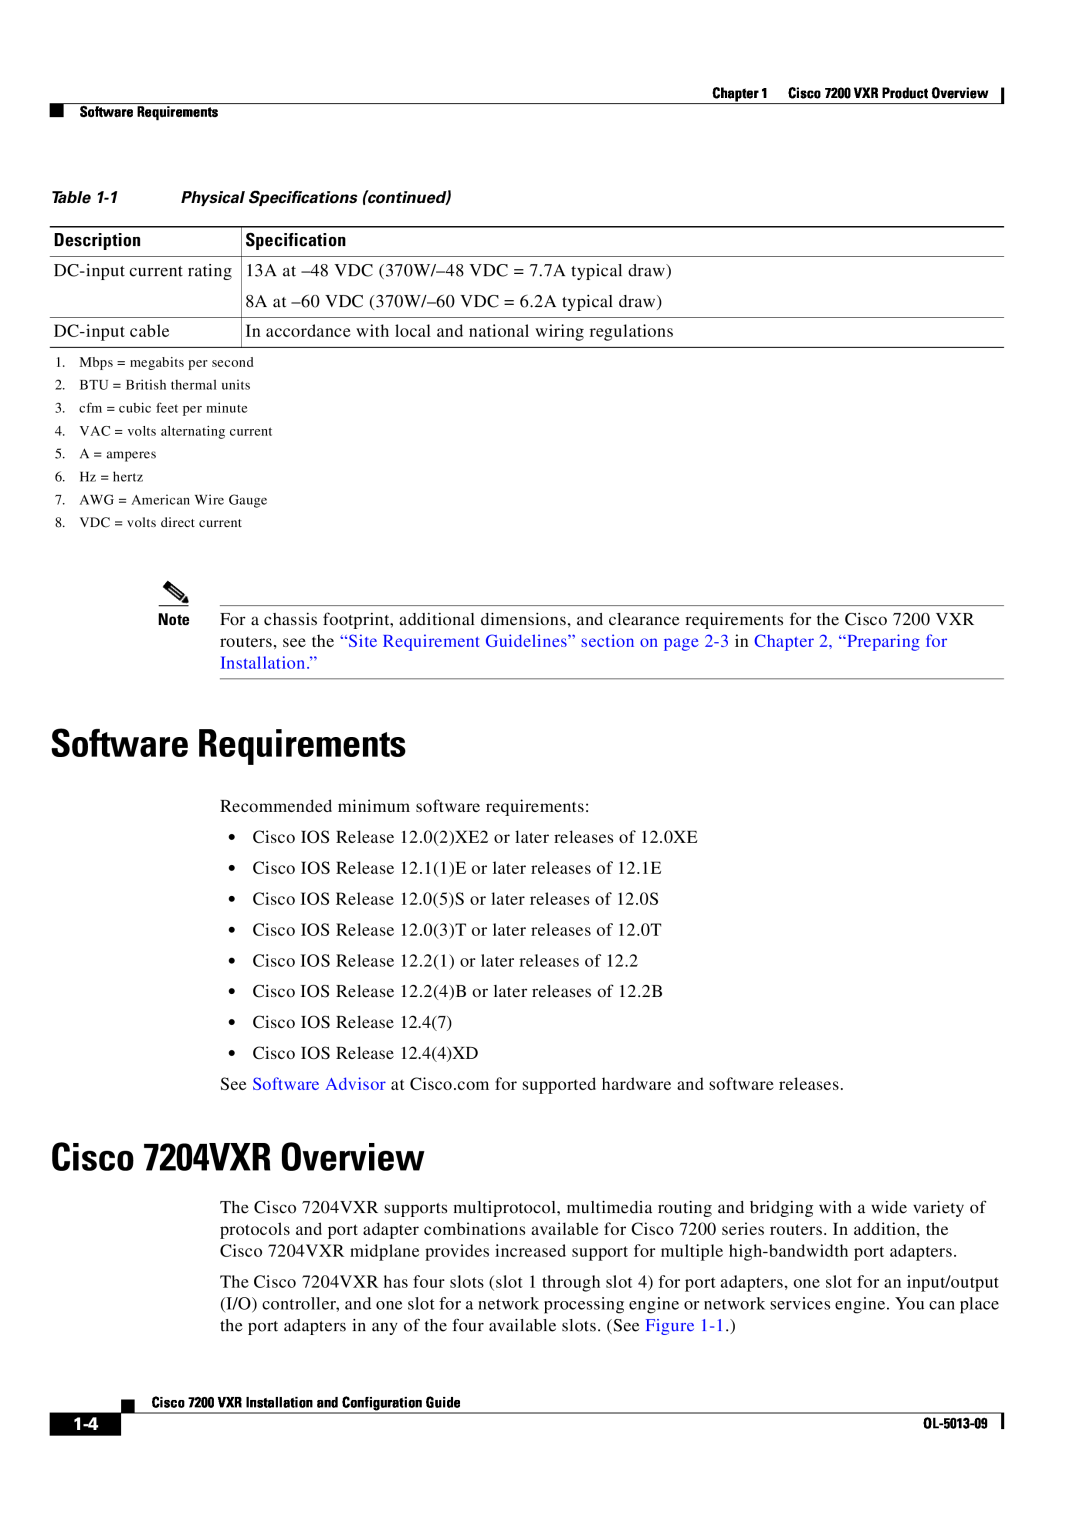 Cisco Systems 7200 VXR manual Software Requirements, Cisco 7204VXR Overview 